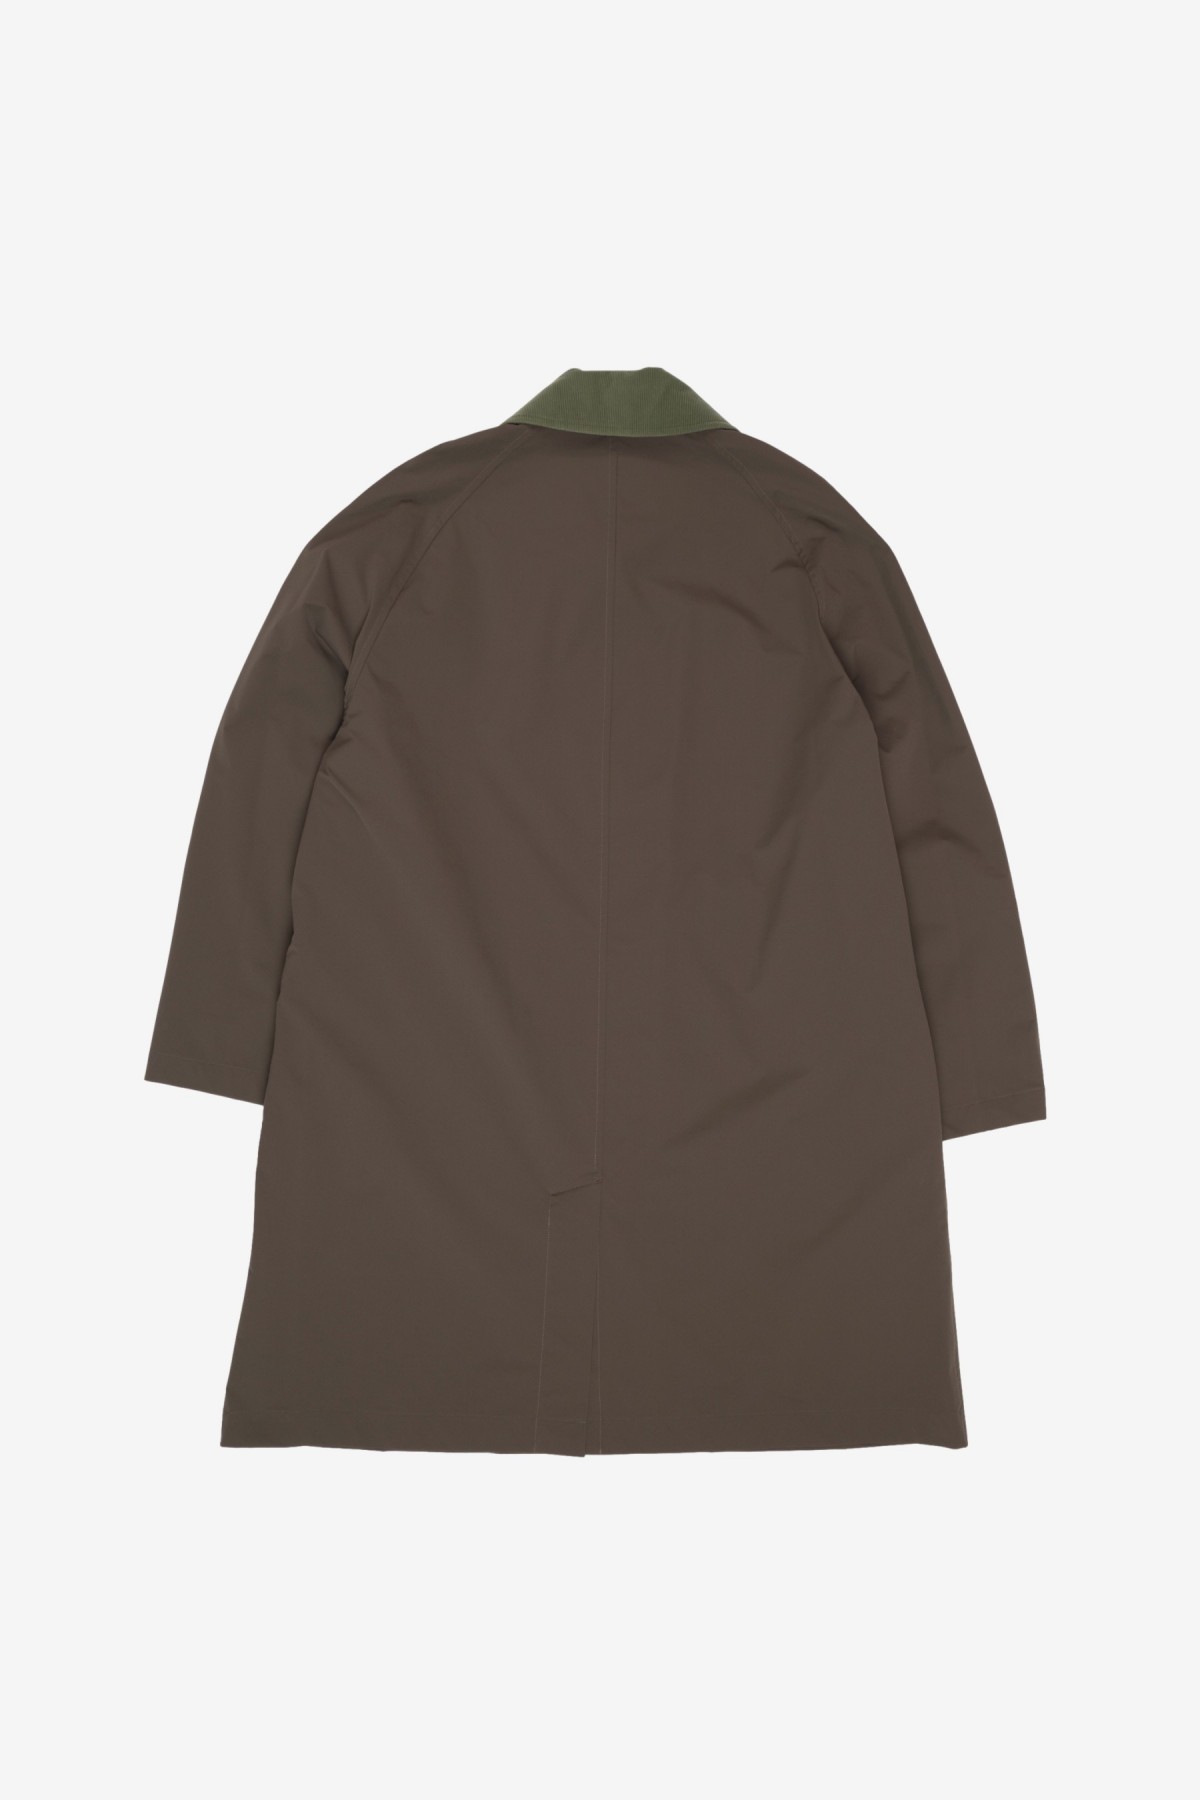 ts(s) Solotex Polyester 2 Way Stretch Cloth Fly Front Raglan Sleeve Coat in Olive